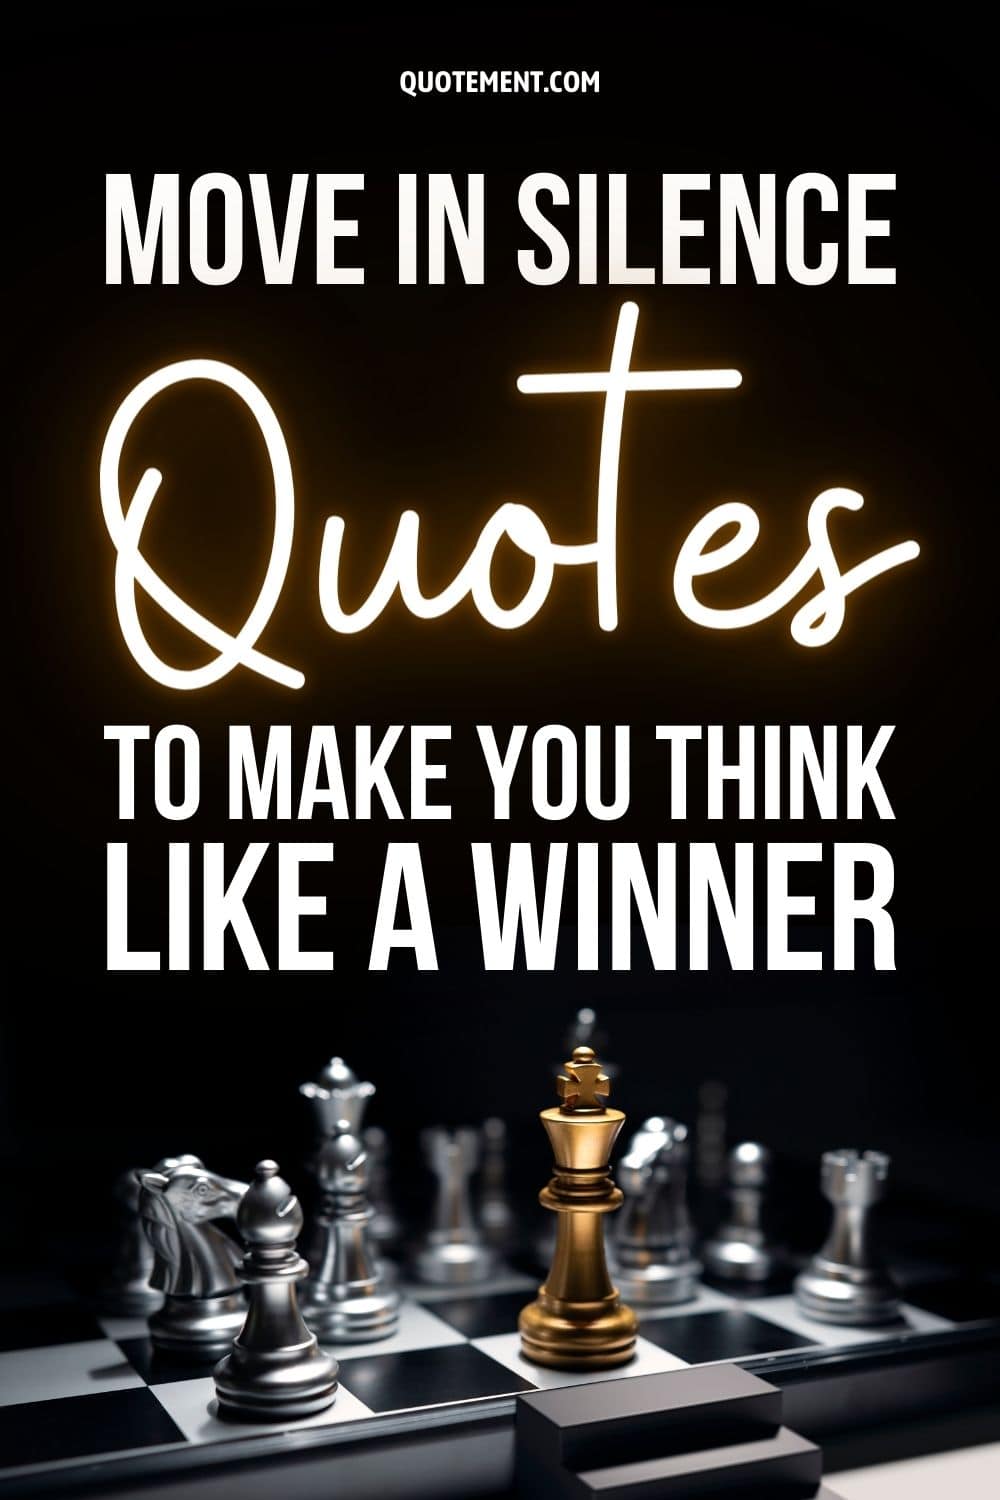 80 Move In Silence Quotes To Make You Think Like A Winner
